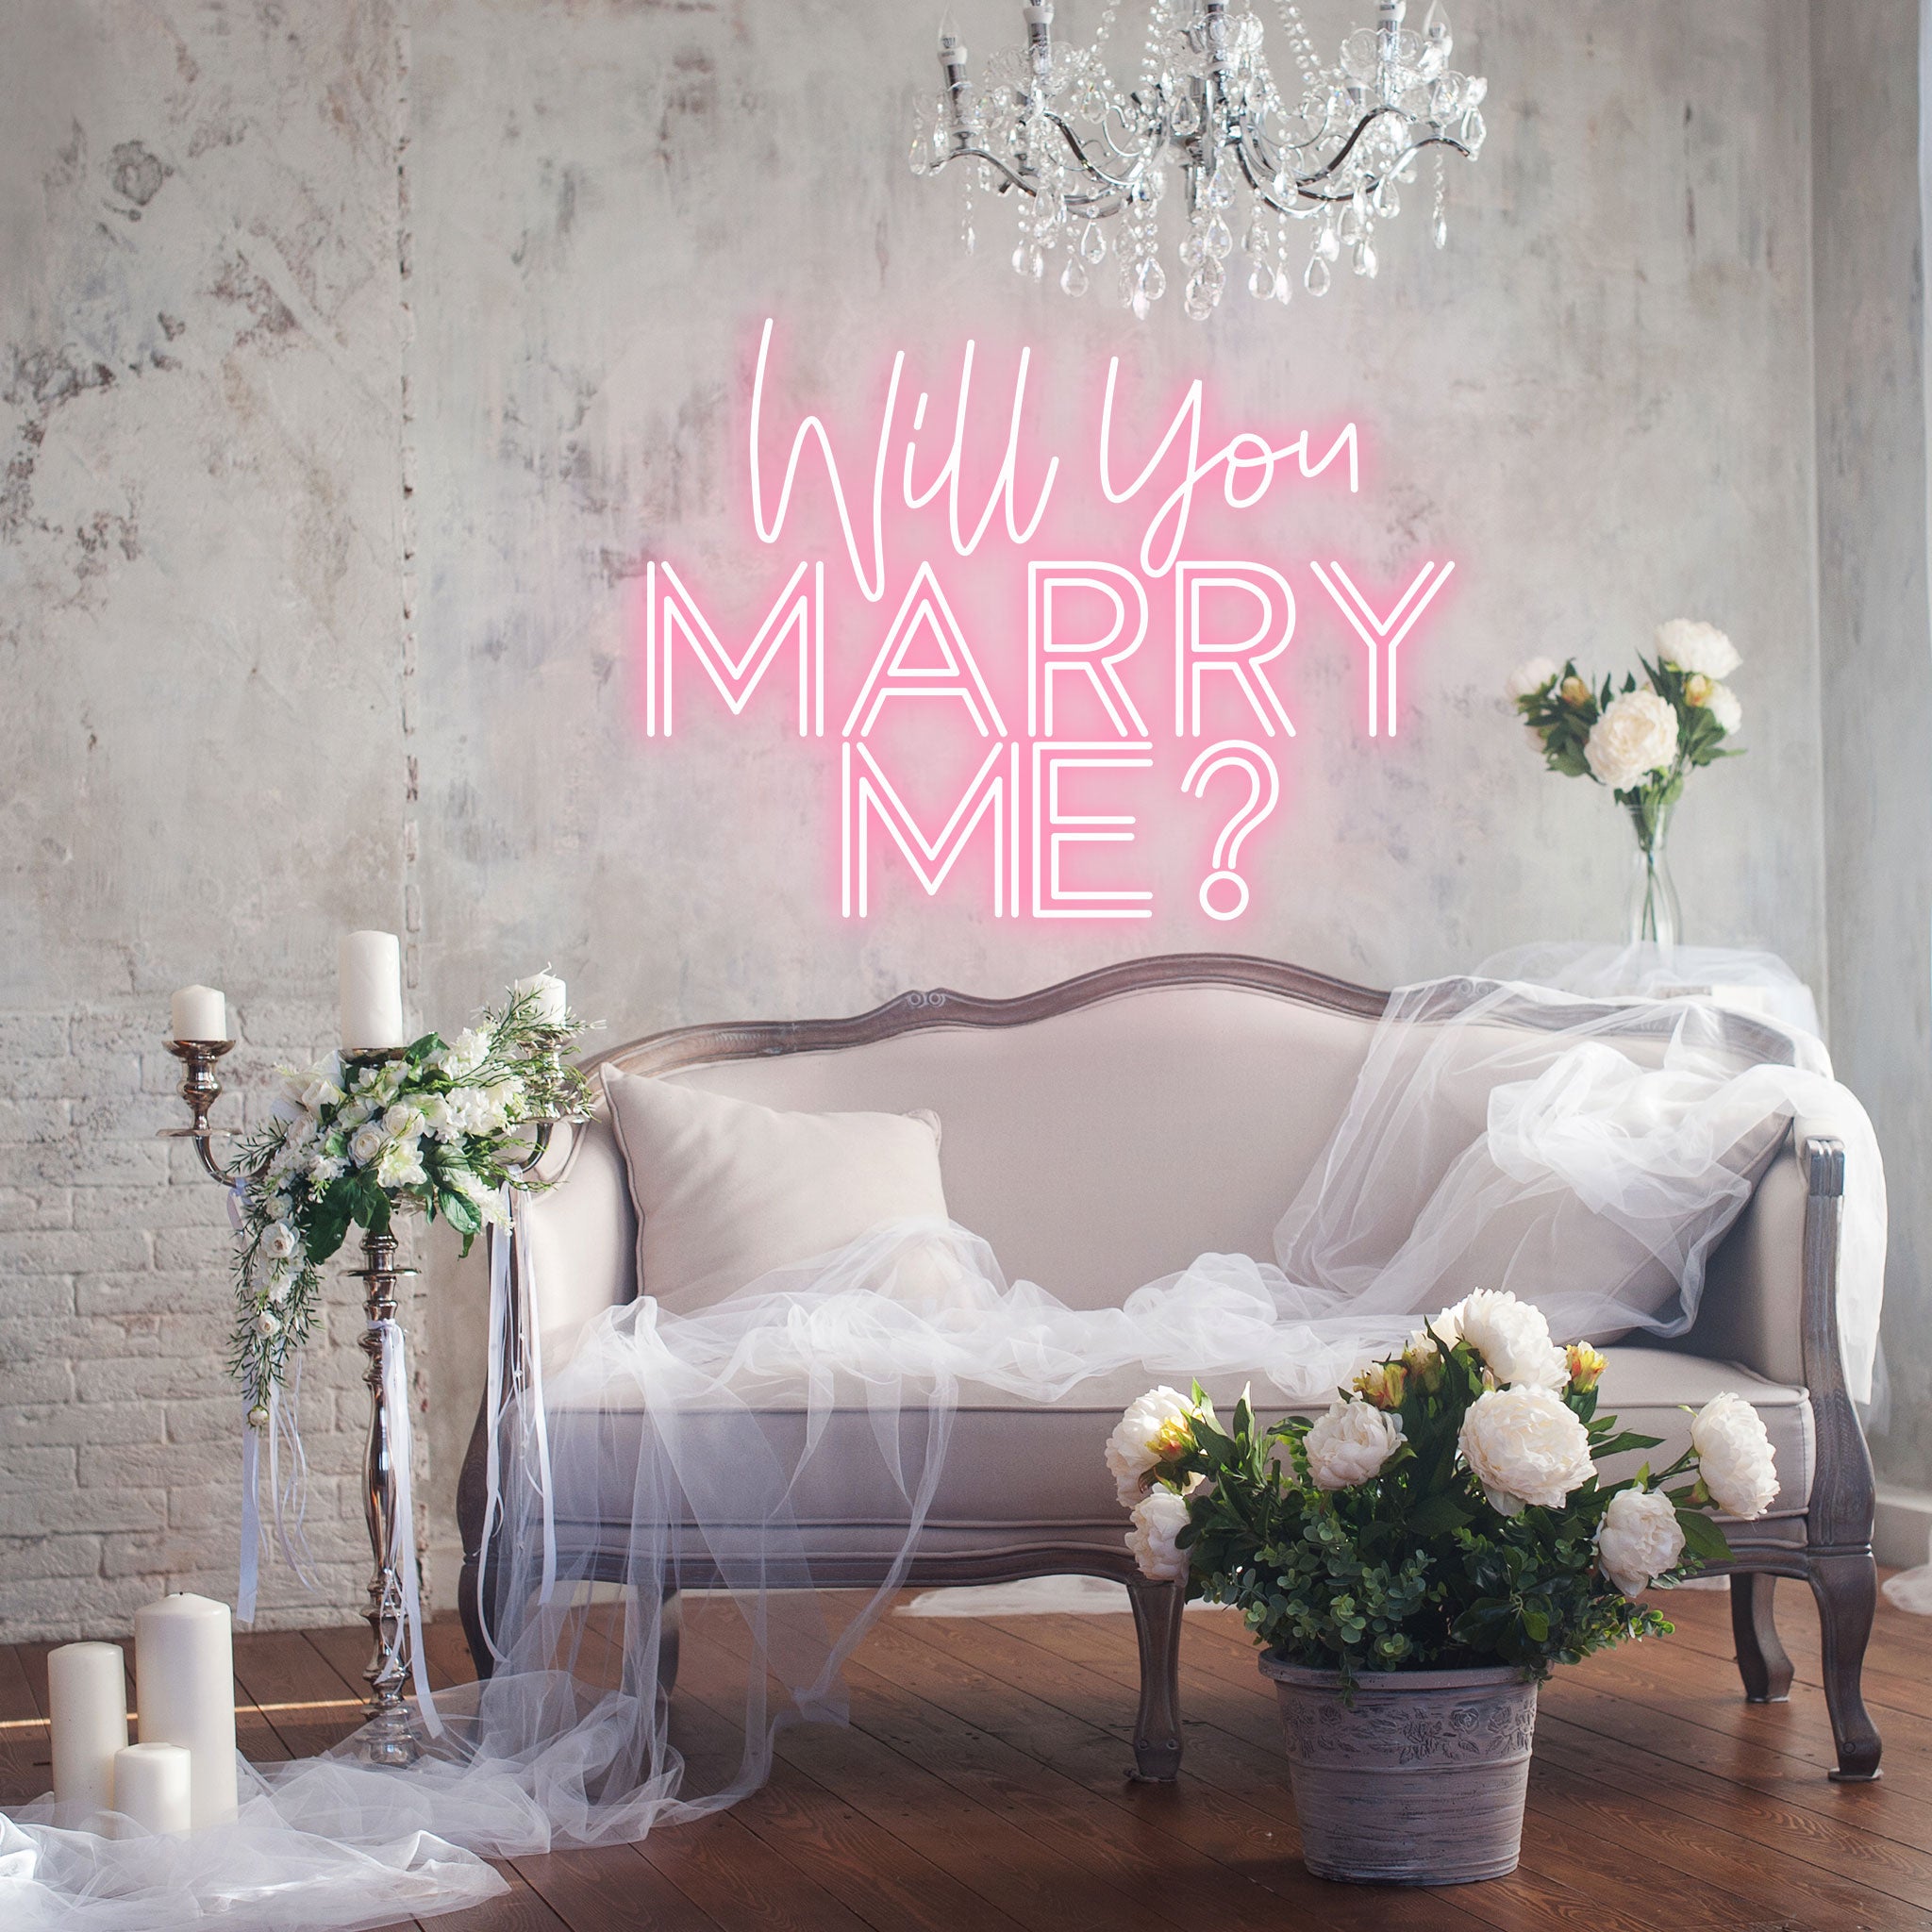 Will You Marry Me - Neon Sign - Wedding Engagement Event